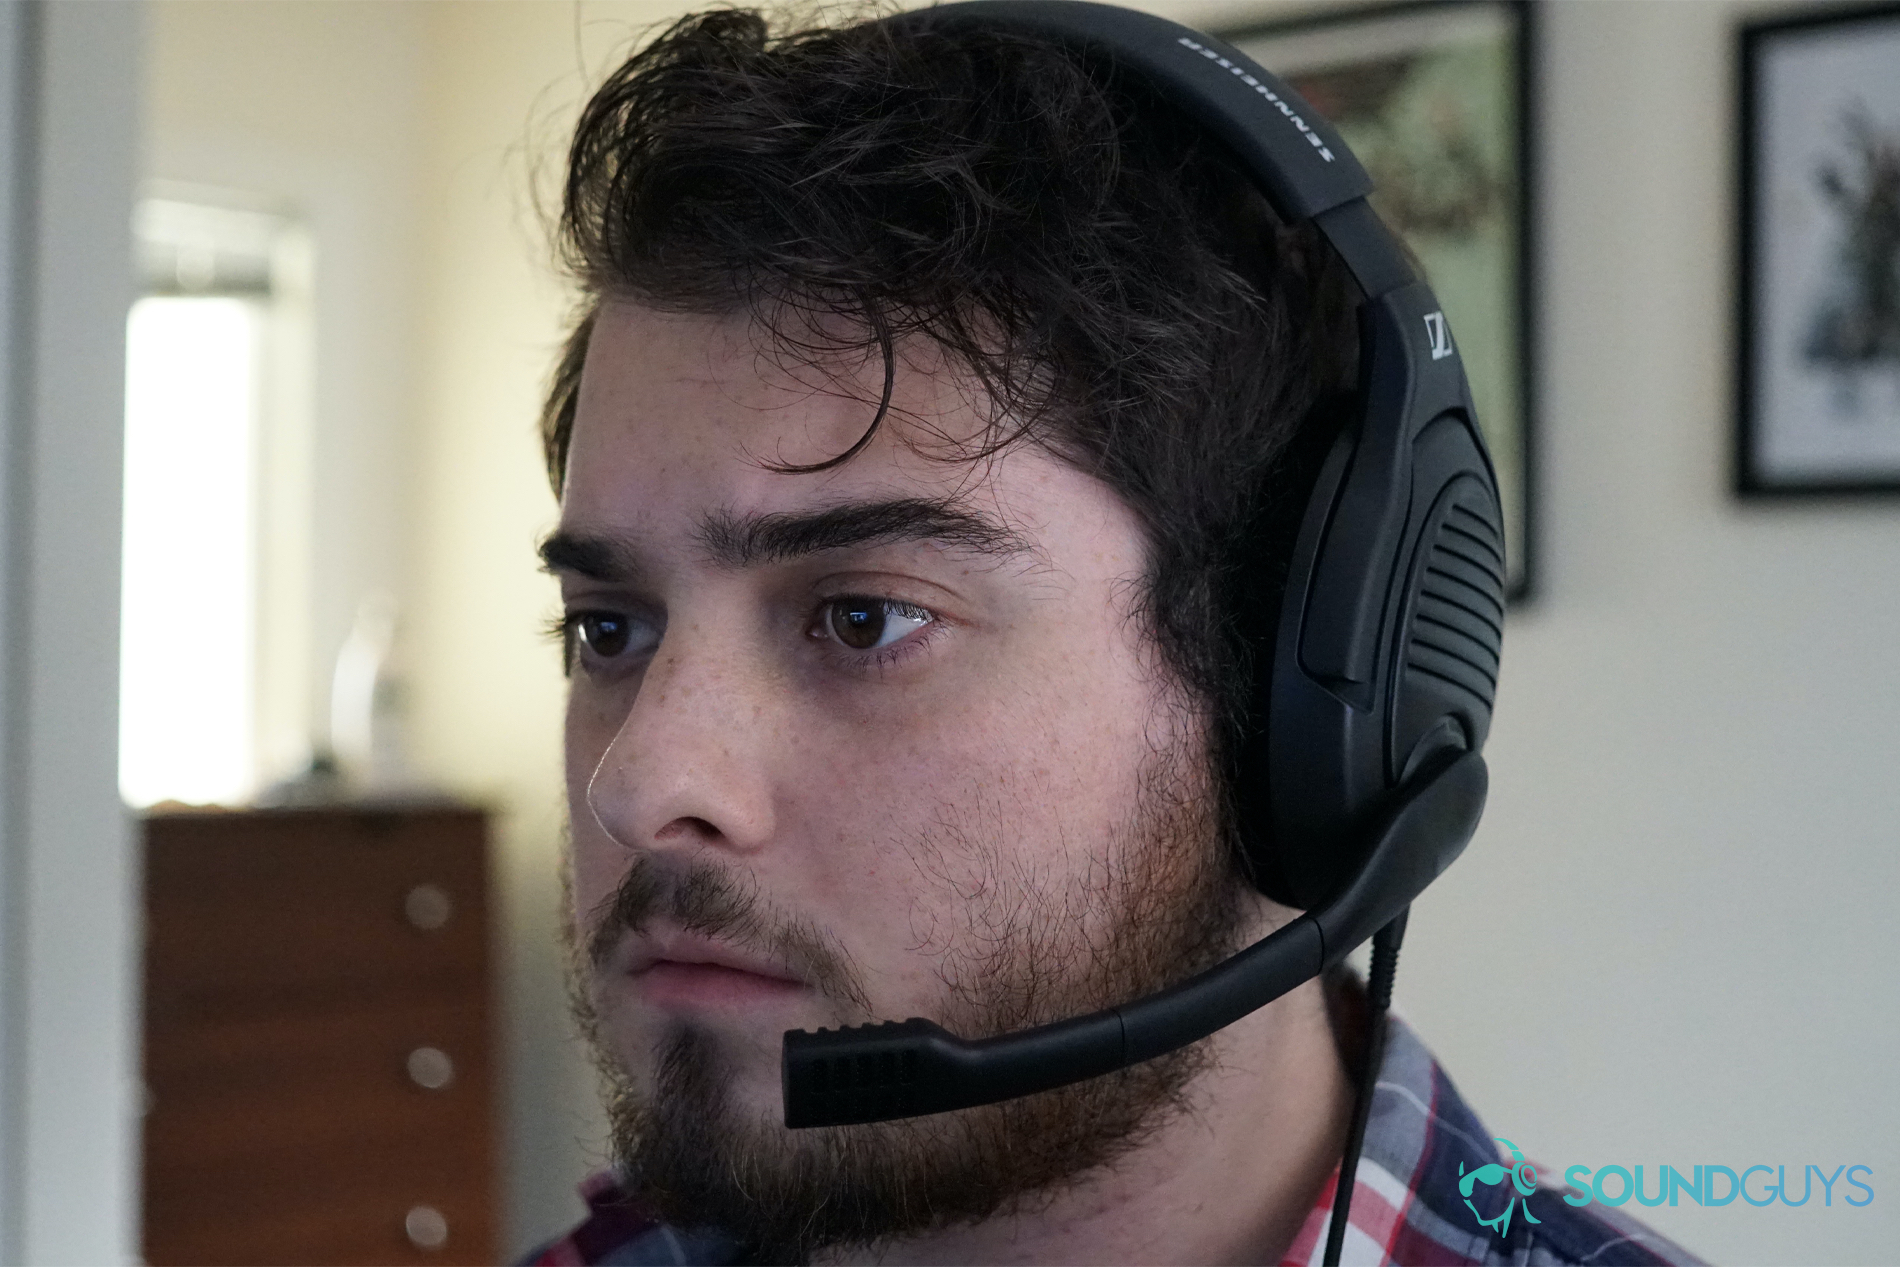 A man wears the Sennheiser PC37X gaming headset while seated at a PC in a room with posters on the wall behind him.